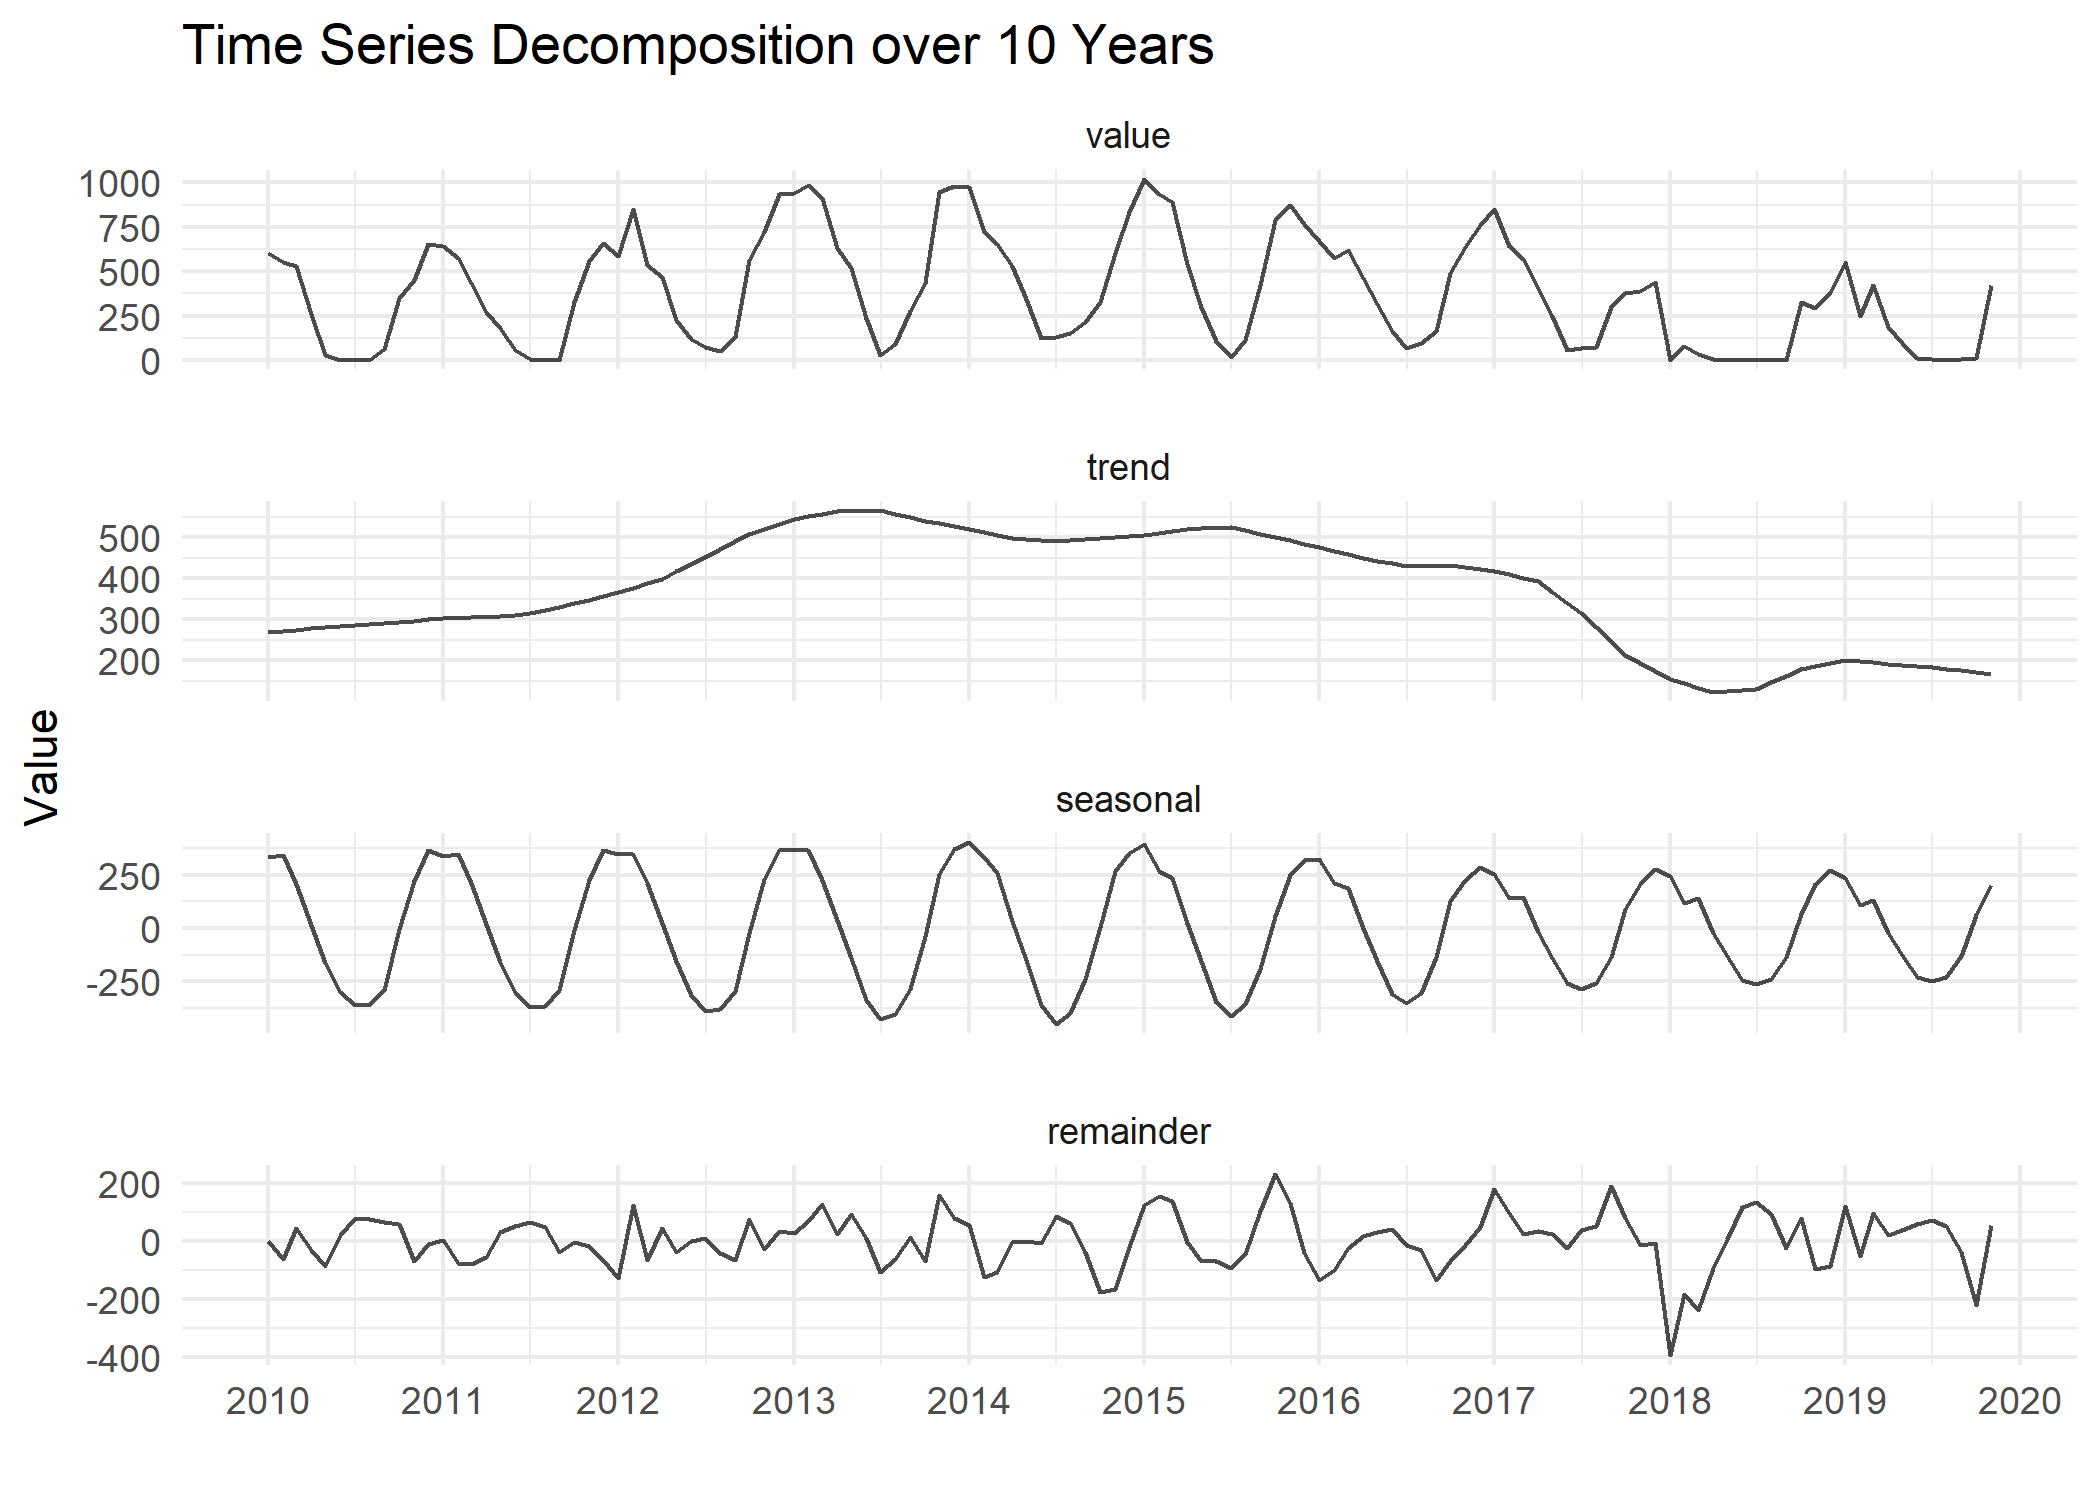 Decomposition of long time series over 10 Years